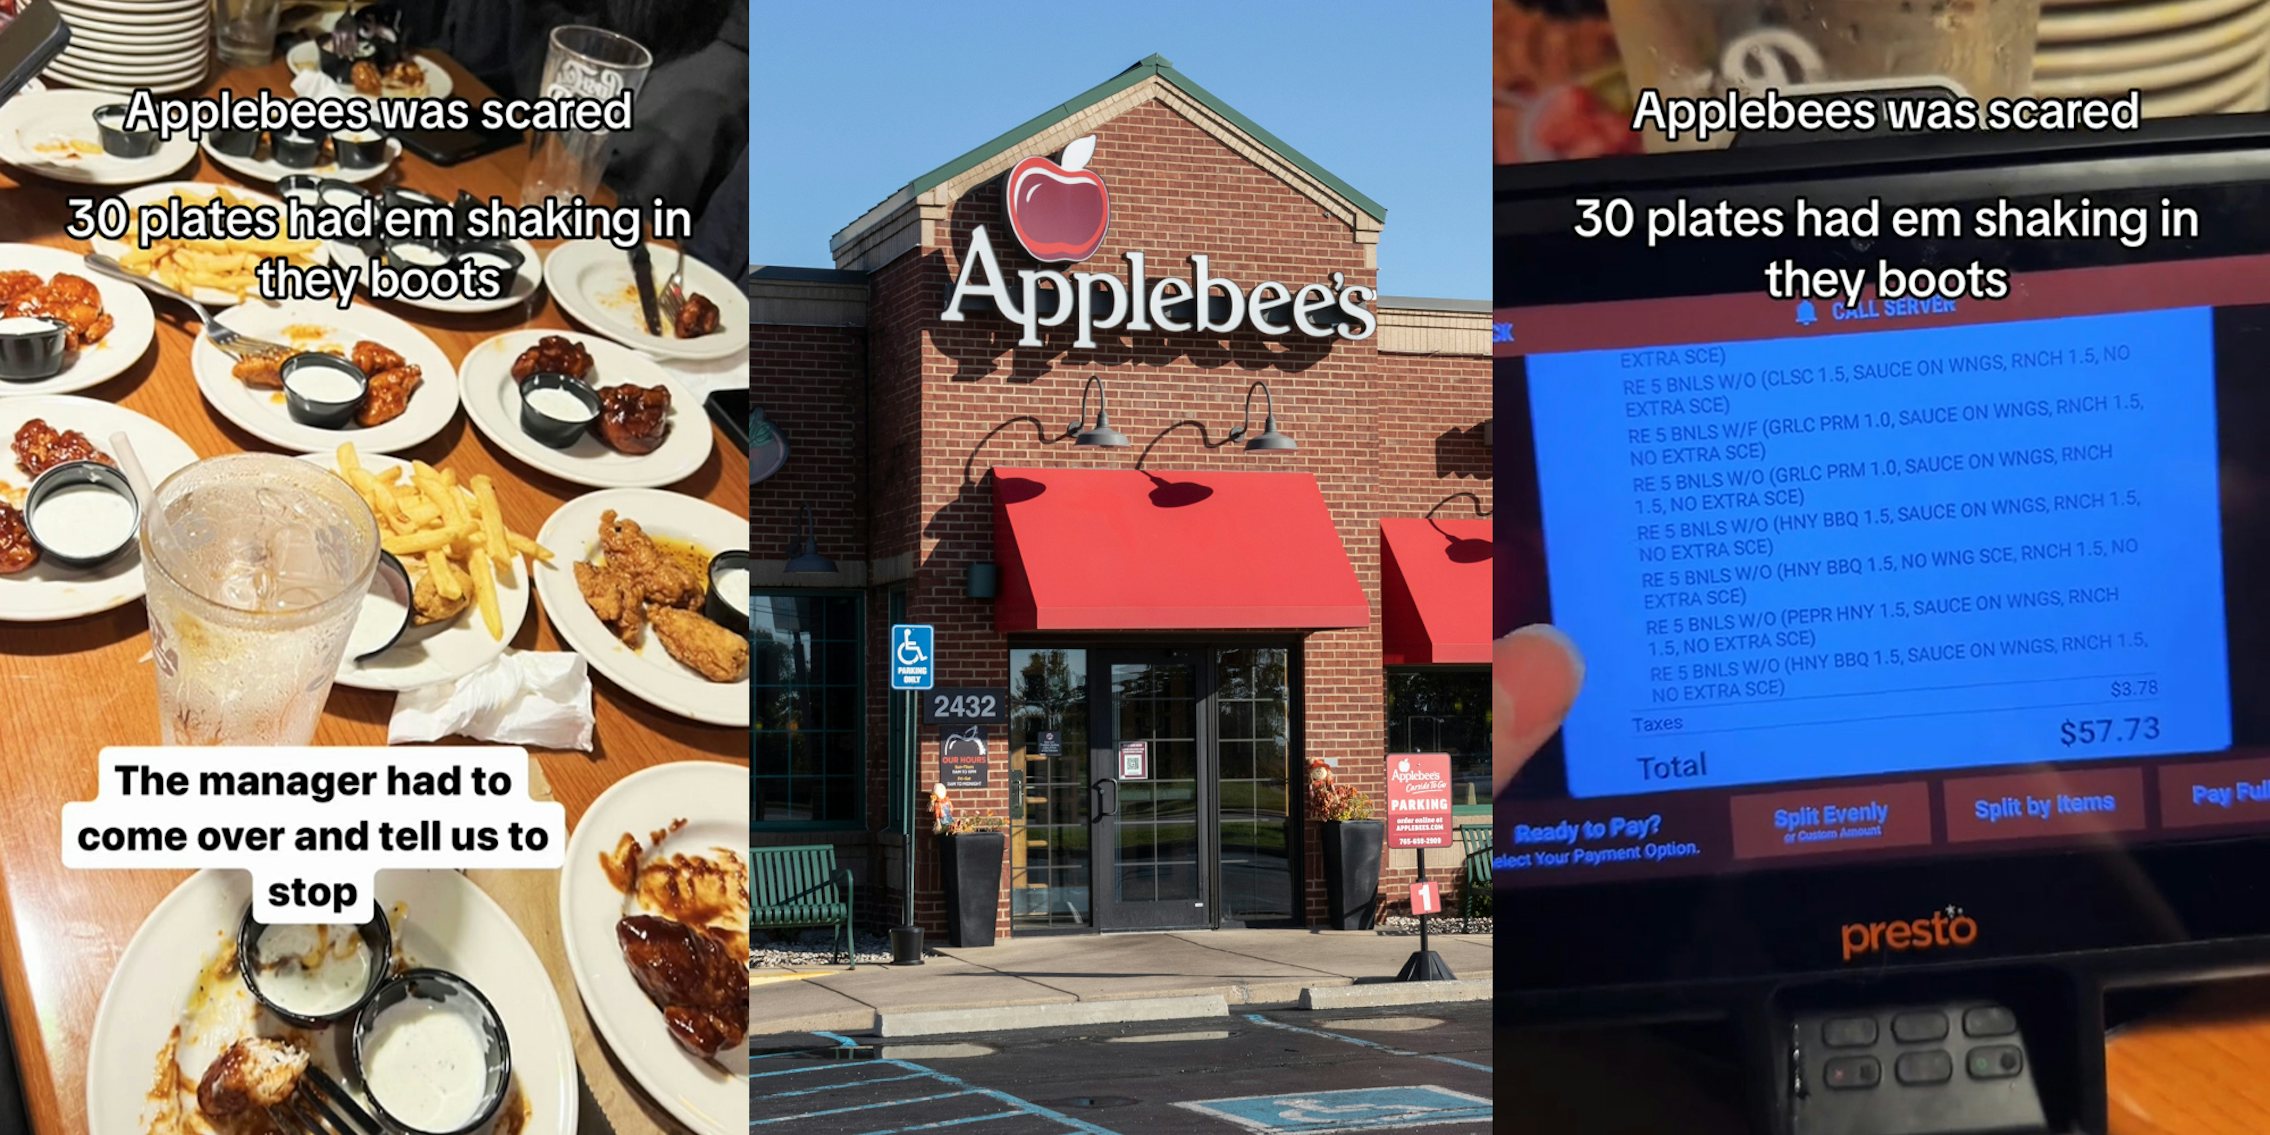 Applebee's table with plates of wings with caption 'Applebees was scared 30 plates had em shaking in they boots The manager had to come over and tell us to stop' (l) Applebee's building with sign (c) Applebee's POS screen showing wing orders with caption 'Applebees was scared 30 plates had em shaking in they boots' (r)